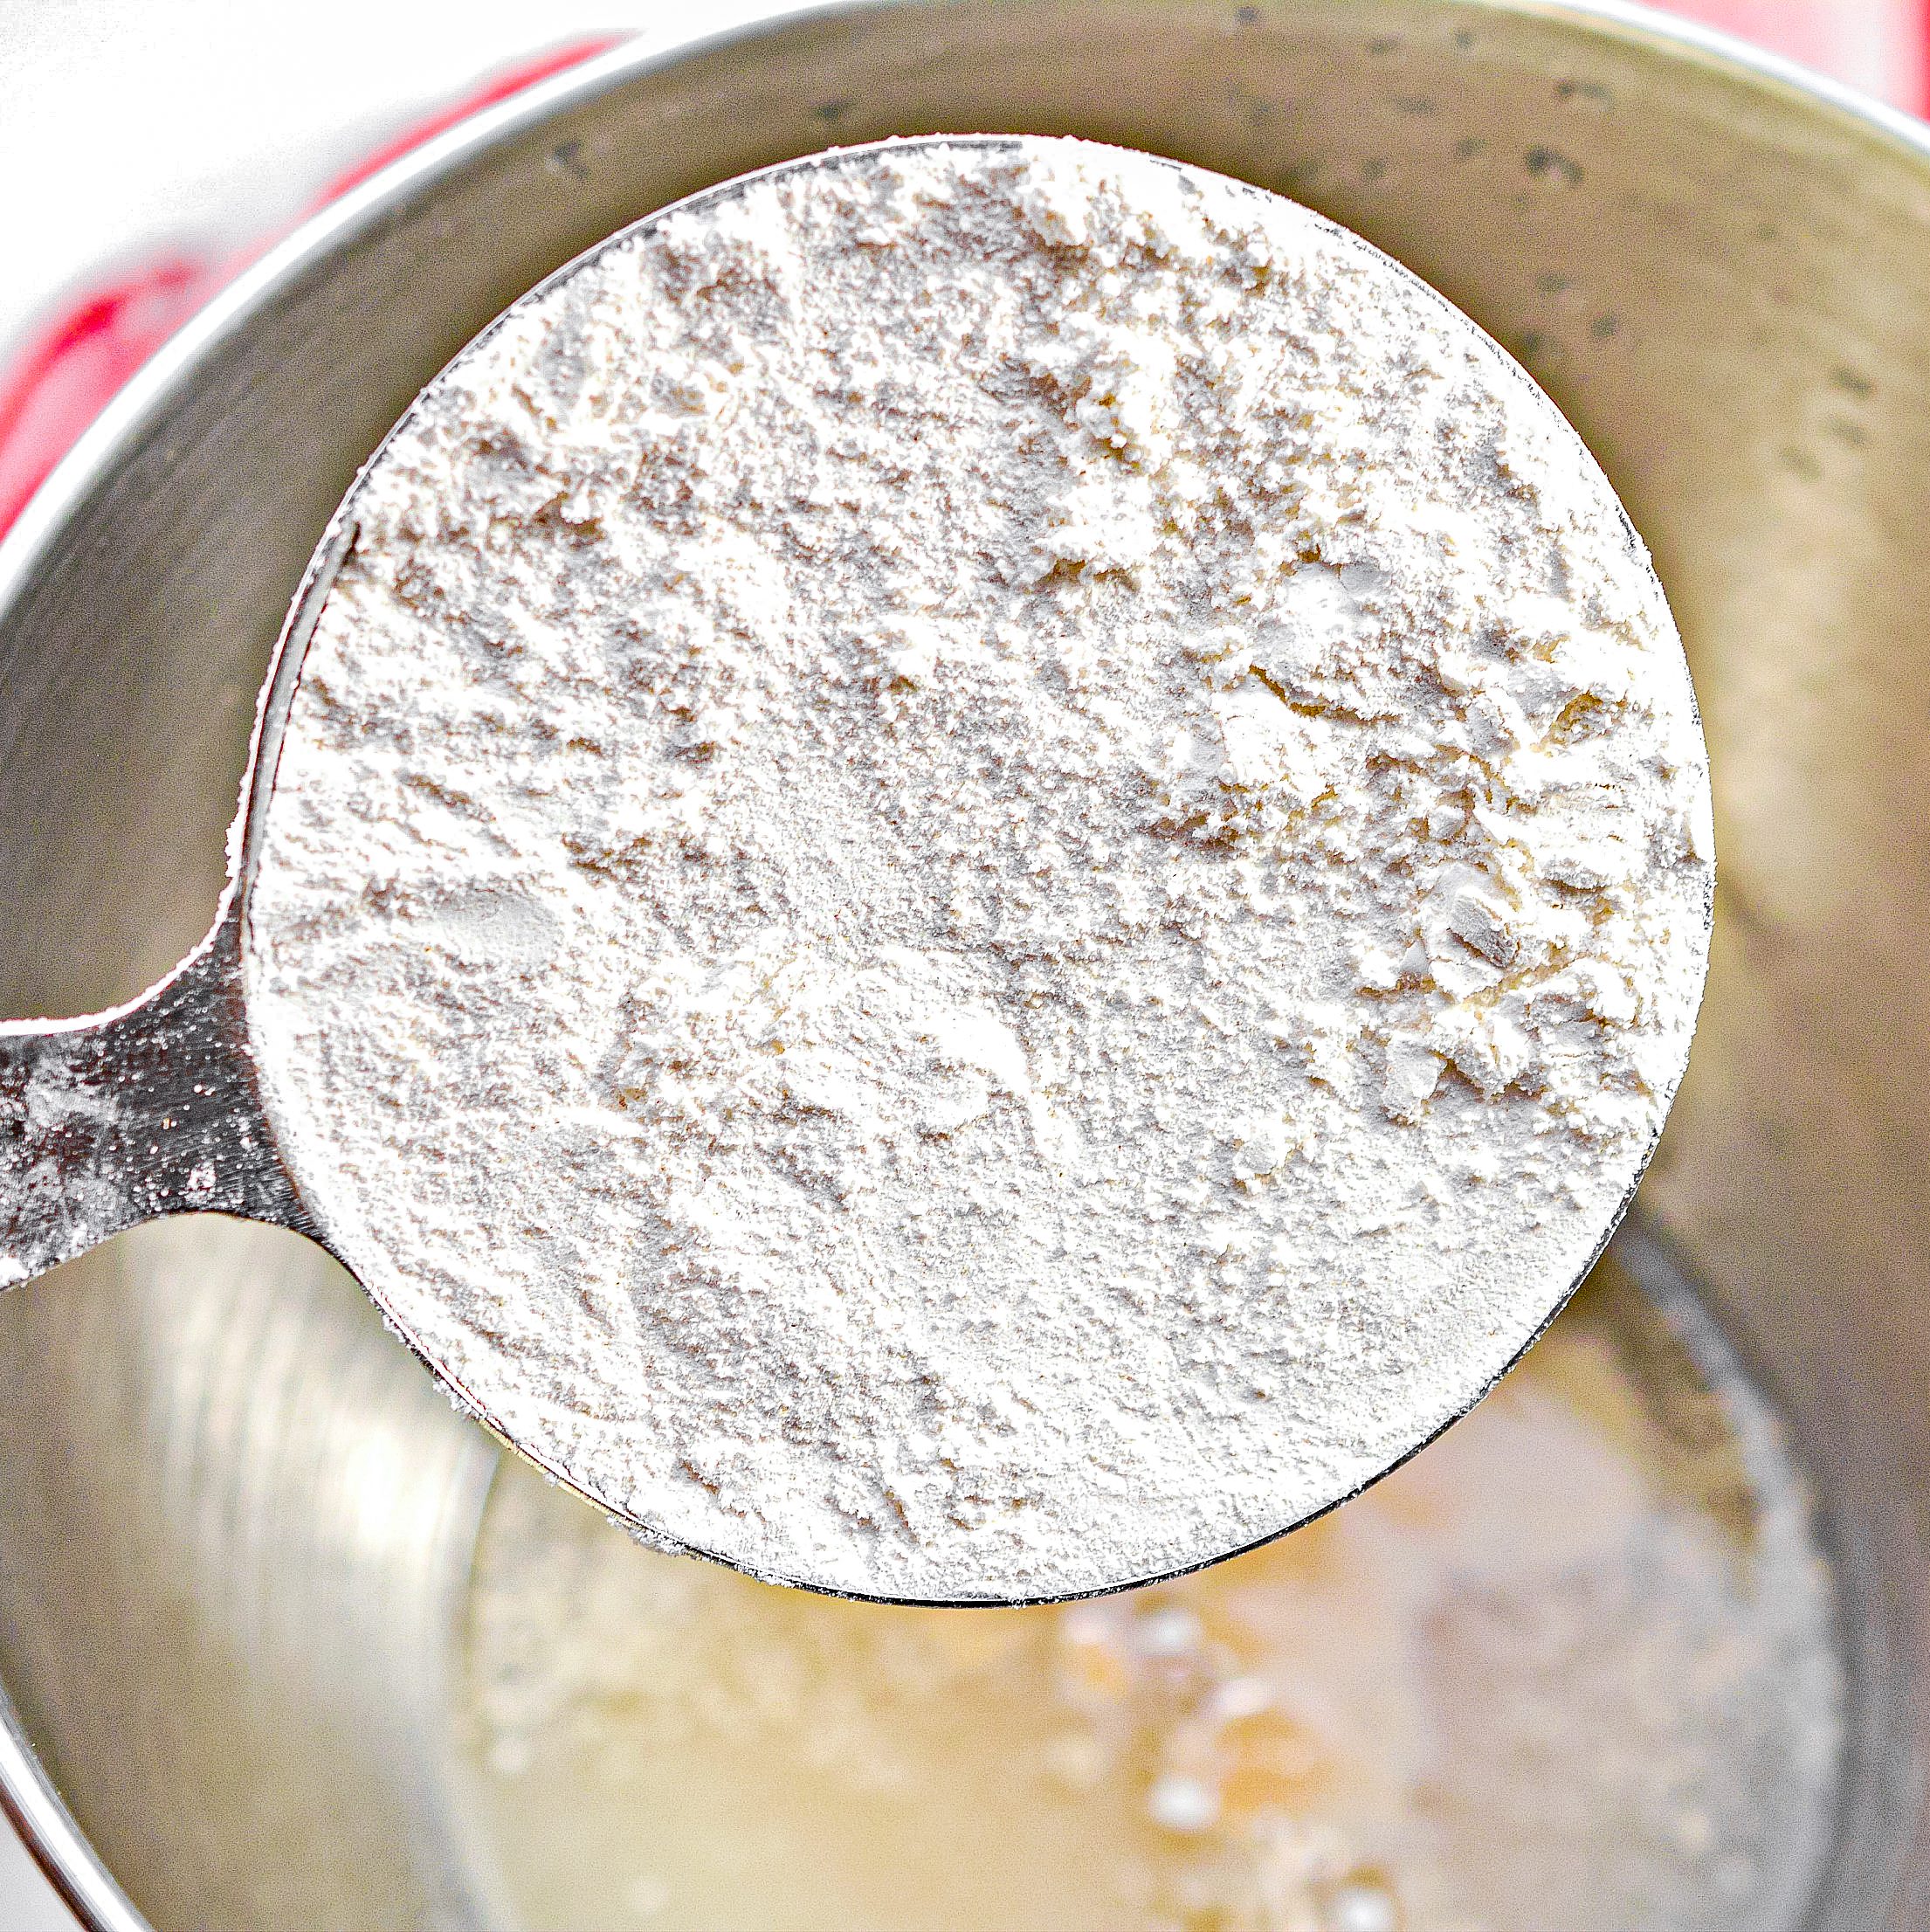 Place 2 cups of flour into the mixing bowl with the yeast mixture.